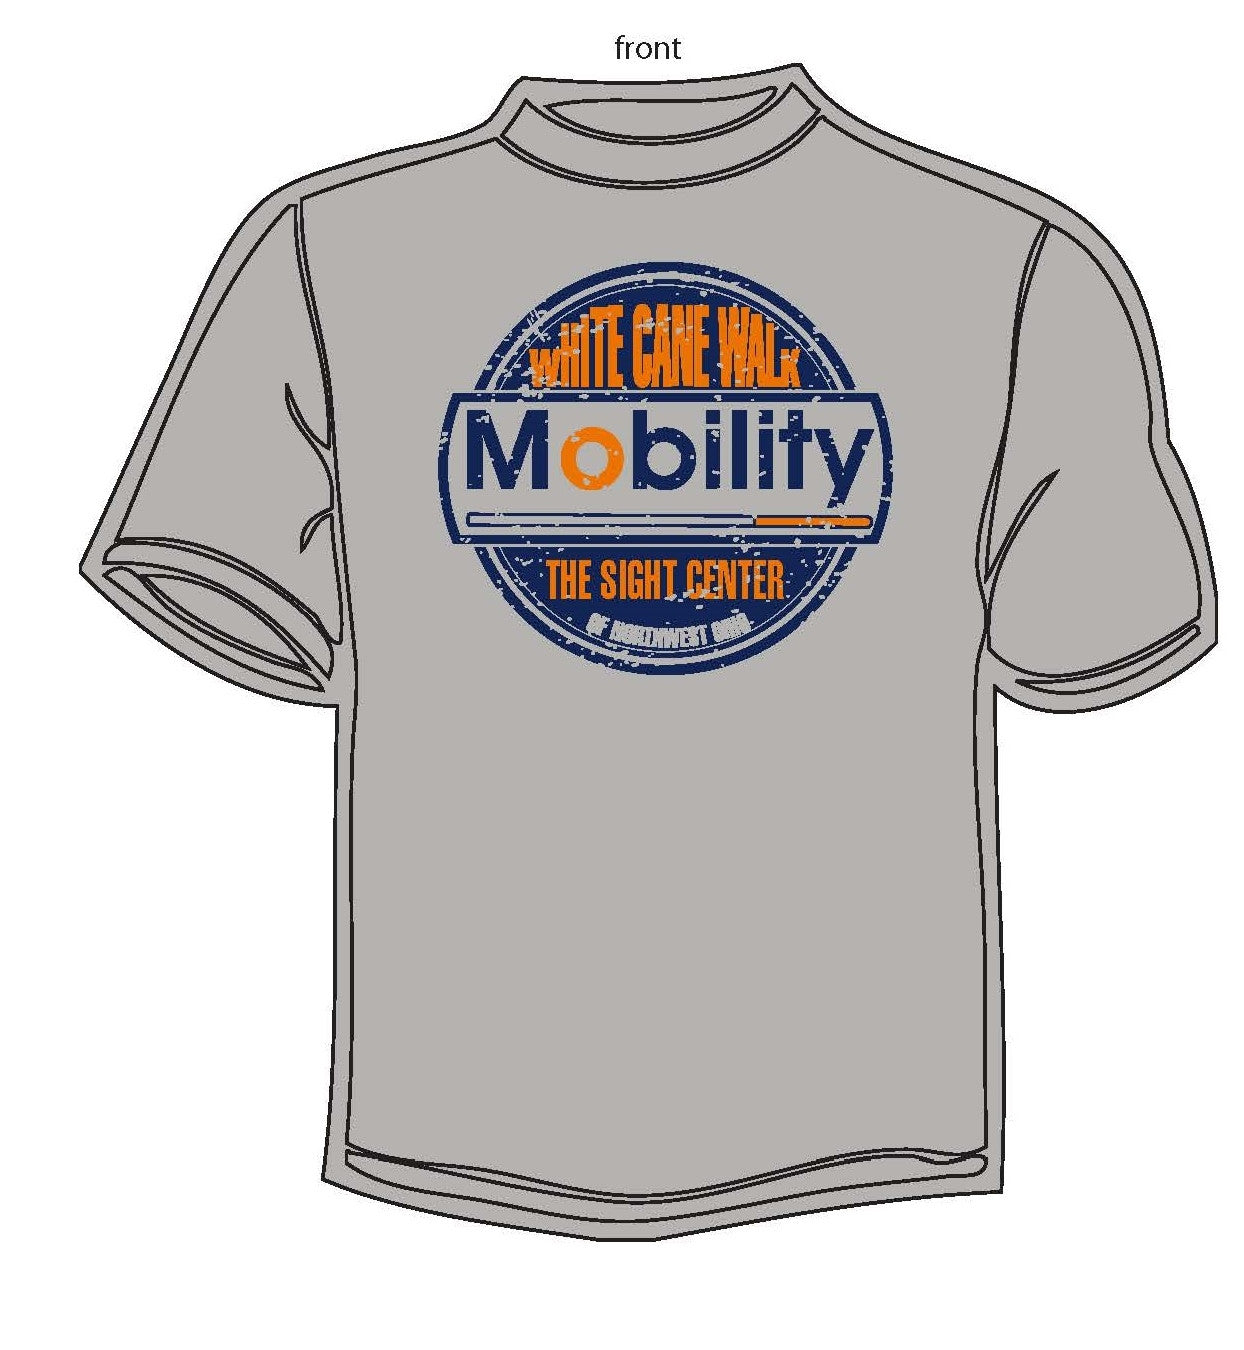 The front of a gray t-shirt the says White Cane Walk. The Sight Center of Northwest Ohio. Presented by Mobility